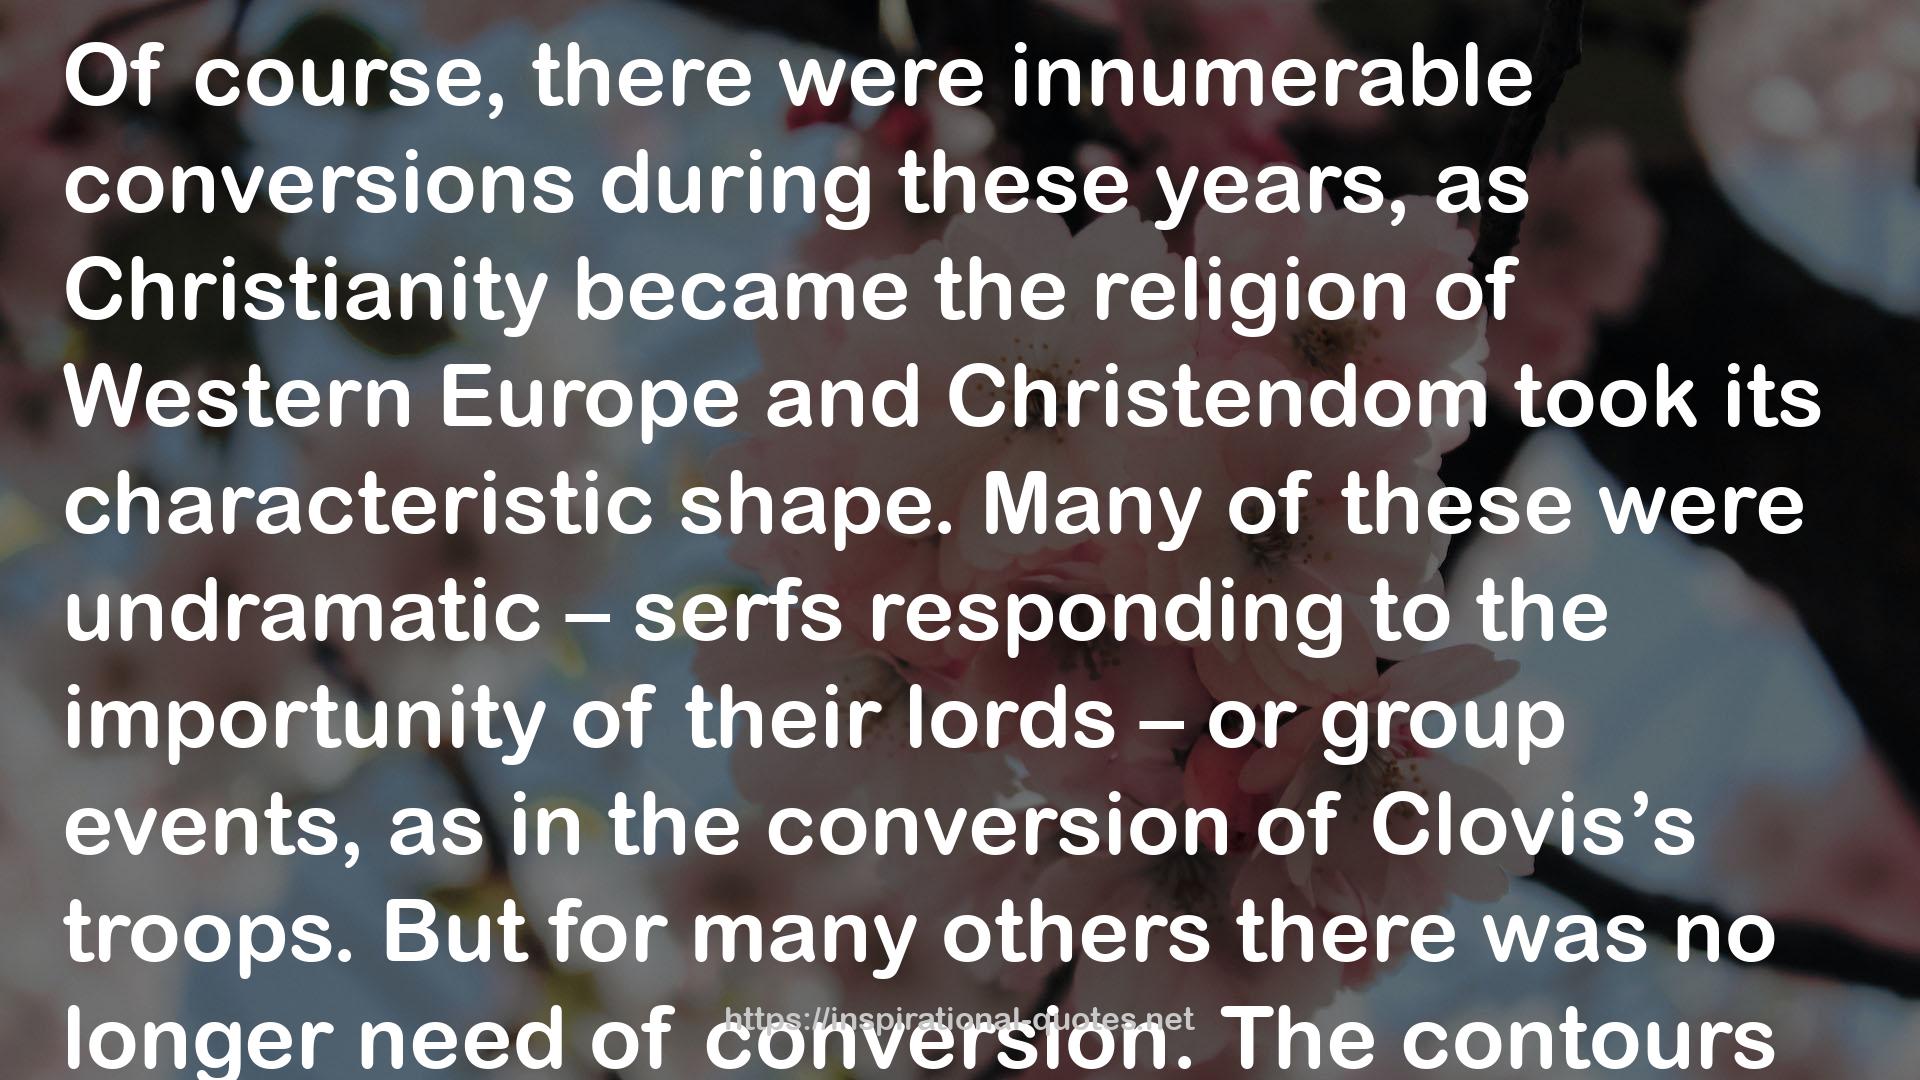  quote : Of course, there were innumerable conversions during these years, as Christianity became the religion of Western Europe and Christendom took its characteristic shape. Many of these were undramatic – serfs responding to the importunity of their lords – or group events, as in the conversion of Clovis’s troops. But for many others there was no longer need of conversion. The contours of Christian experience had shifted. Whereas up to the time of Augustine there had been four stages of initiation and incorporation into the church, there were no typically two. The first stage was brief and obligatory – baptism in the days or months after birth. The second stage would happen later and would take longer – if it took place at all – when confirmation happened and when parents instructed their children and godparents instructed their godchildren in the beliefs and behavior of the Christian church. Indeed, at this time of the rapid spread of Christianity into new territories, it was vitally necessary that the baptizands be taught well. The heroic and valorous values of the folk, the glorious narratives of warriors, the adulation of wealth and strength – all of these were as firmly in place in seventh-century Gaul as the pagan values and narratives had been in third-century Rome. If Christianity were to be a religion of revelation that could challenge the commonplaces of Gallic society, if new habits were to be taught and new role models were to be adopted, there would have to be some form of postbaptismal pastoral follow-up.